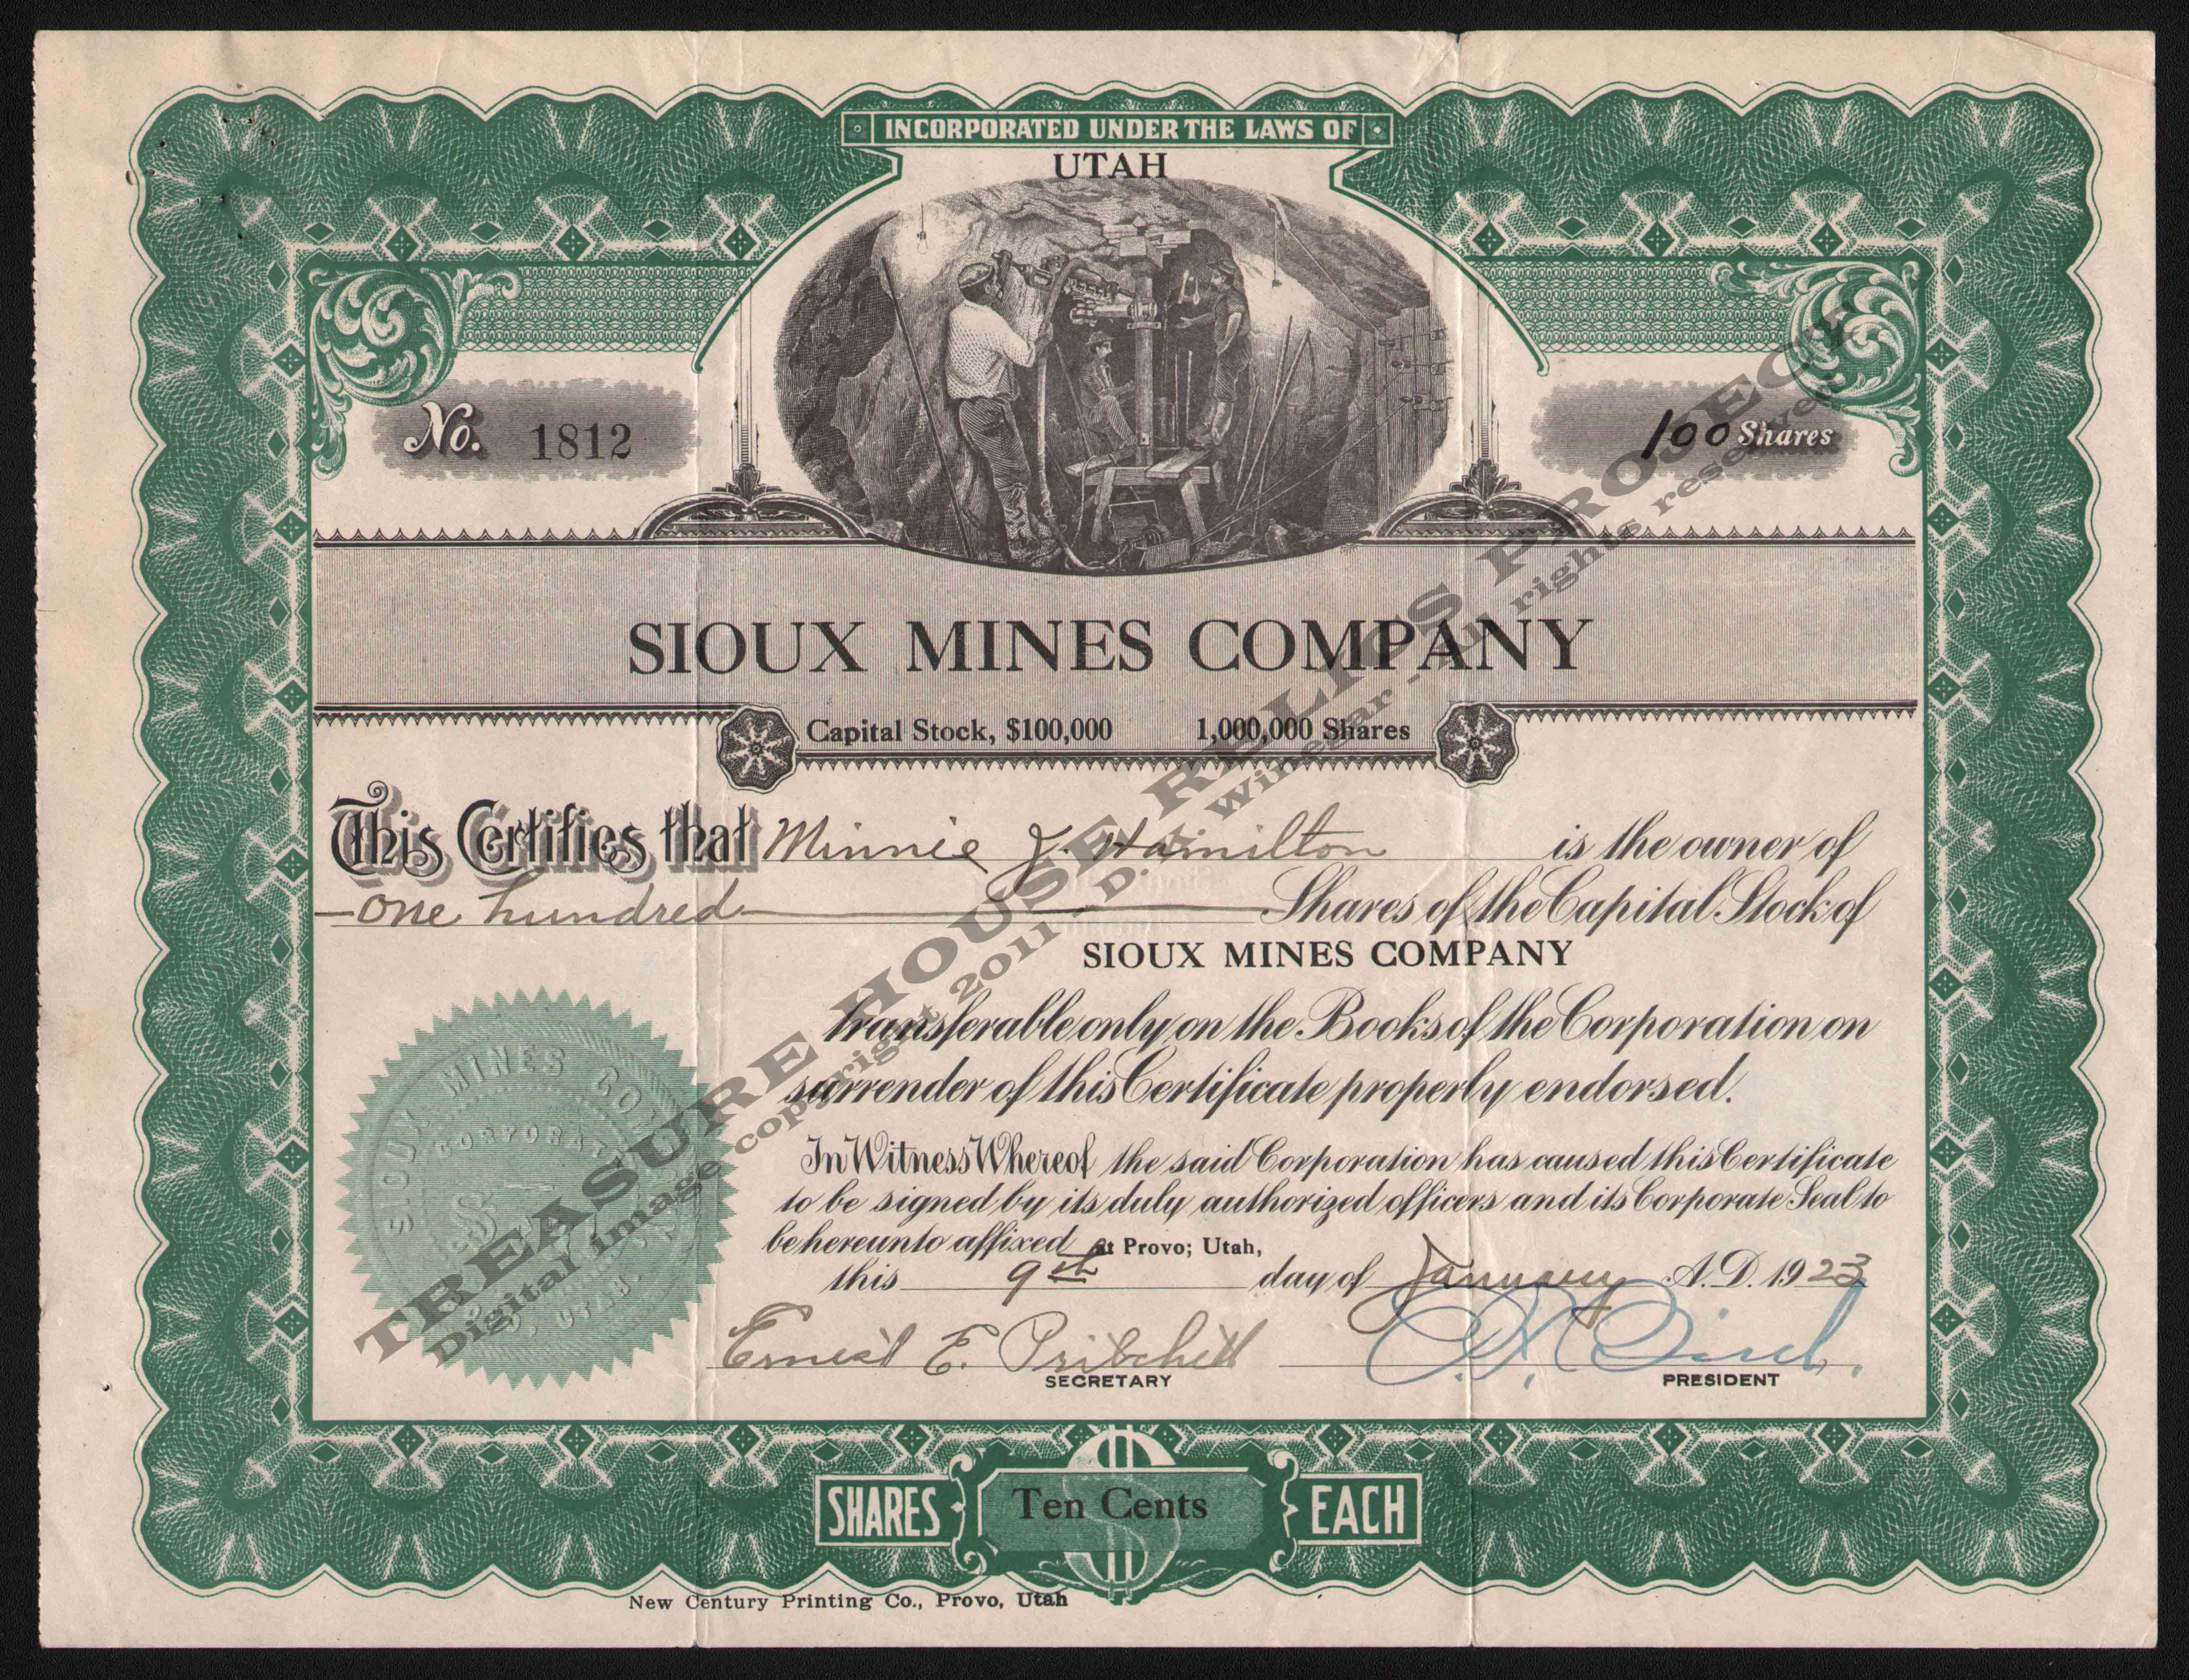 SIOUX_MINES_COMPANY_1812_1923_400_emboss.jpg